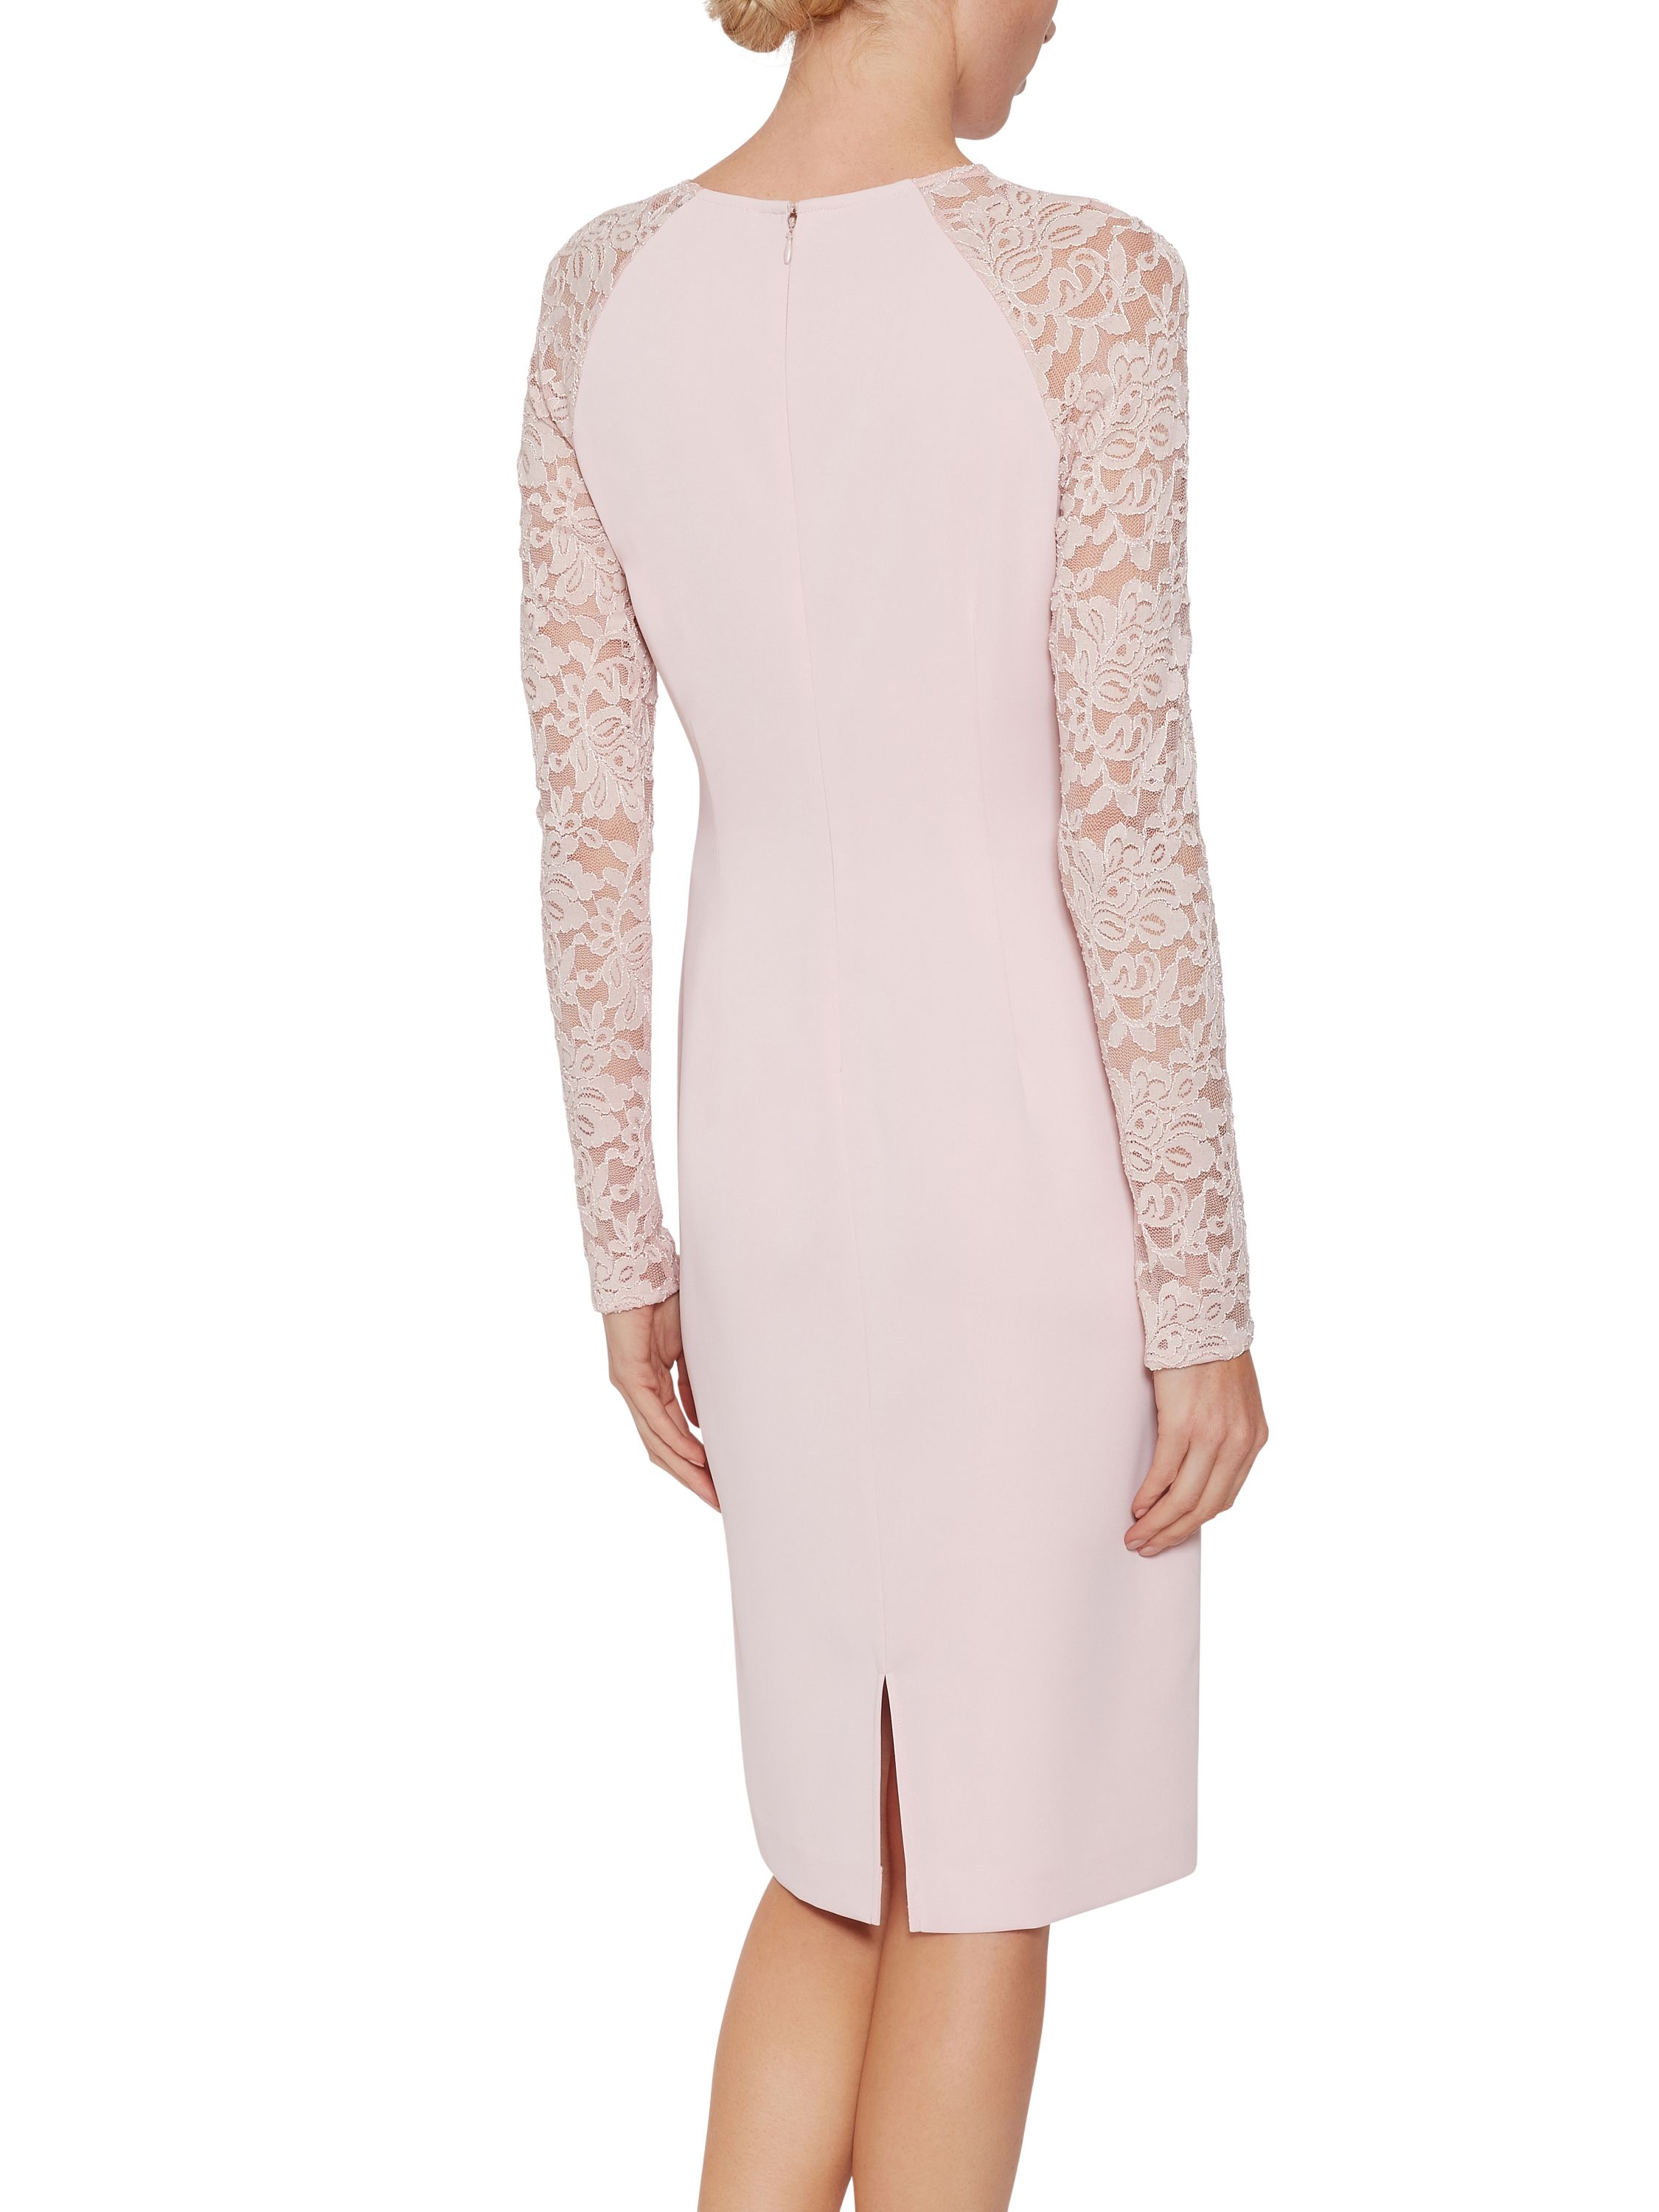 Gina Bacconi presents its stunning crepe and lace dress. This perfect occasionwear piece is comprised of a classic shift dress with sheer dainty floral lace sleeves. This beautiful dress is perfect for a summer party or special occasion. The dress is partially lined and fastens using a concealed back zip.